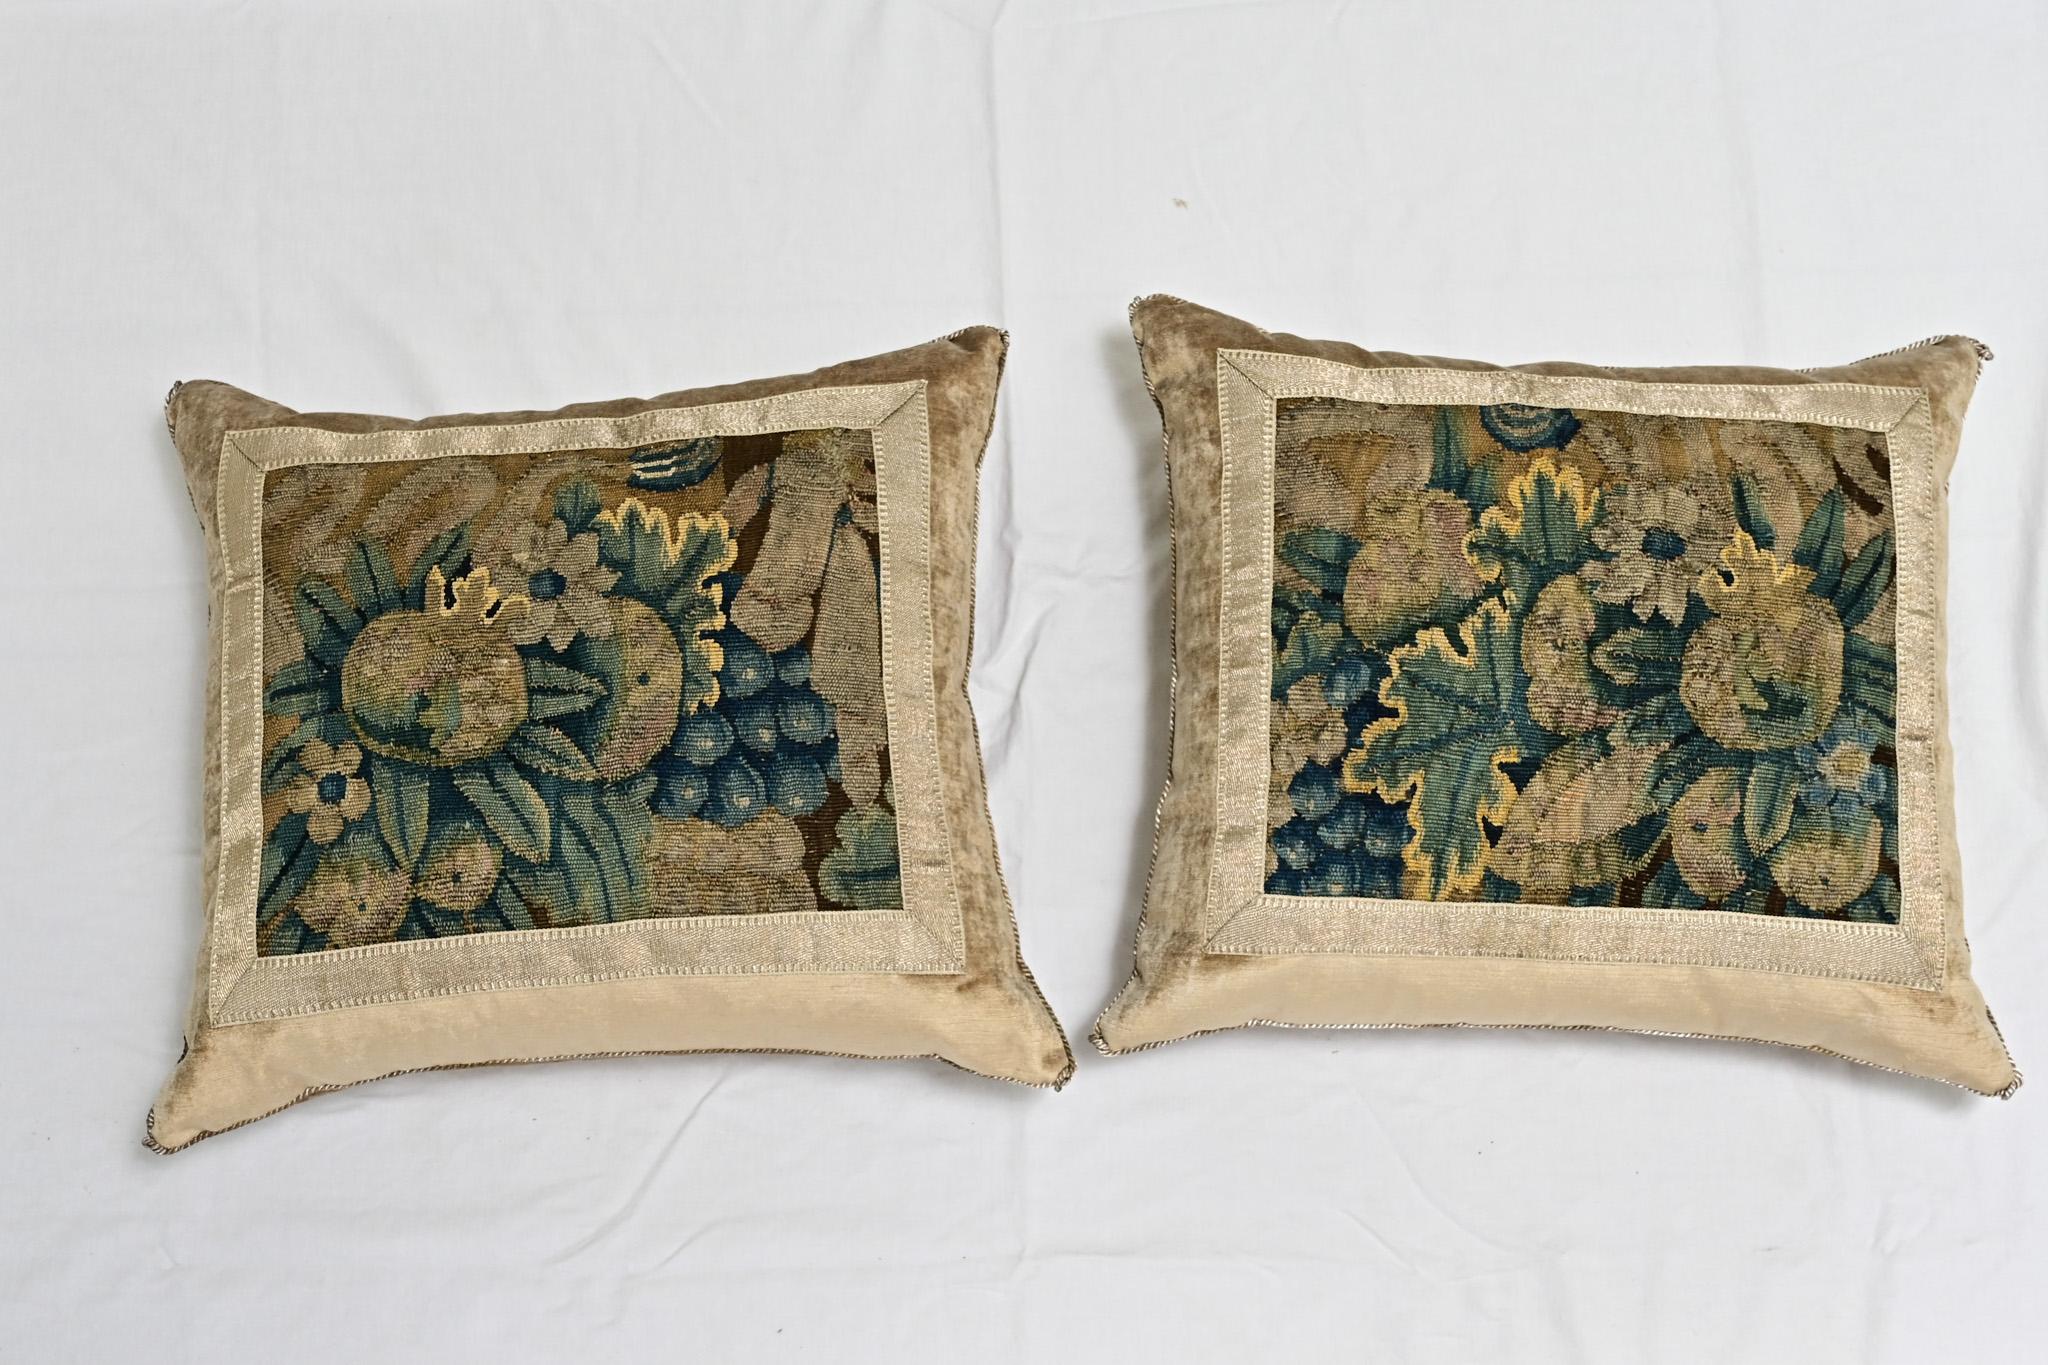 A pair of beautiful 17th Century Flemish tapestry fragment and velvet pillows. Hand trimmed and features vintage gold metallic cording, knotted in the corners. Designed by Rebecca Vizard for B. Viz Design. These down filled pillows make a statement